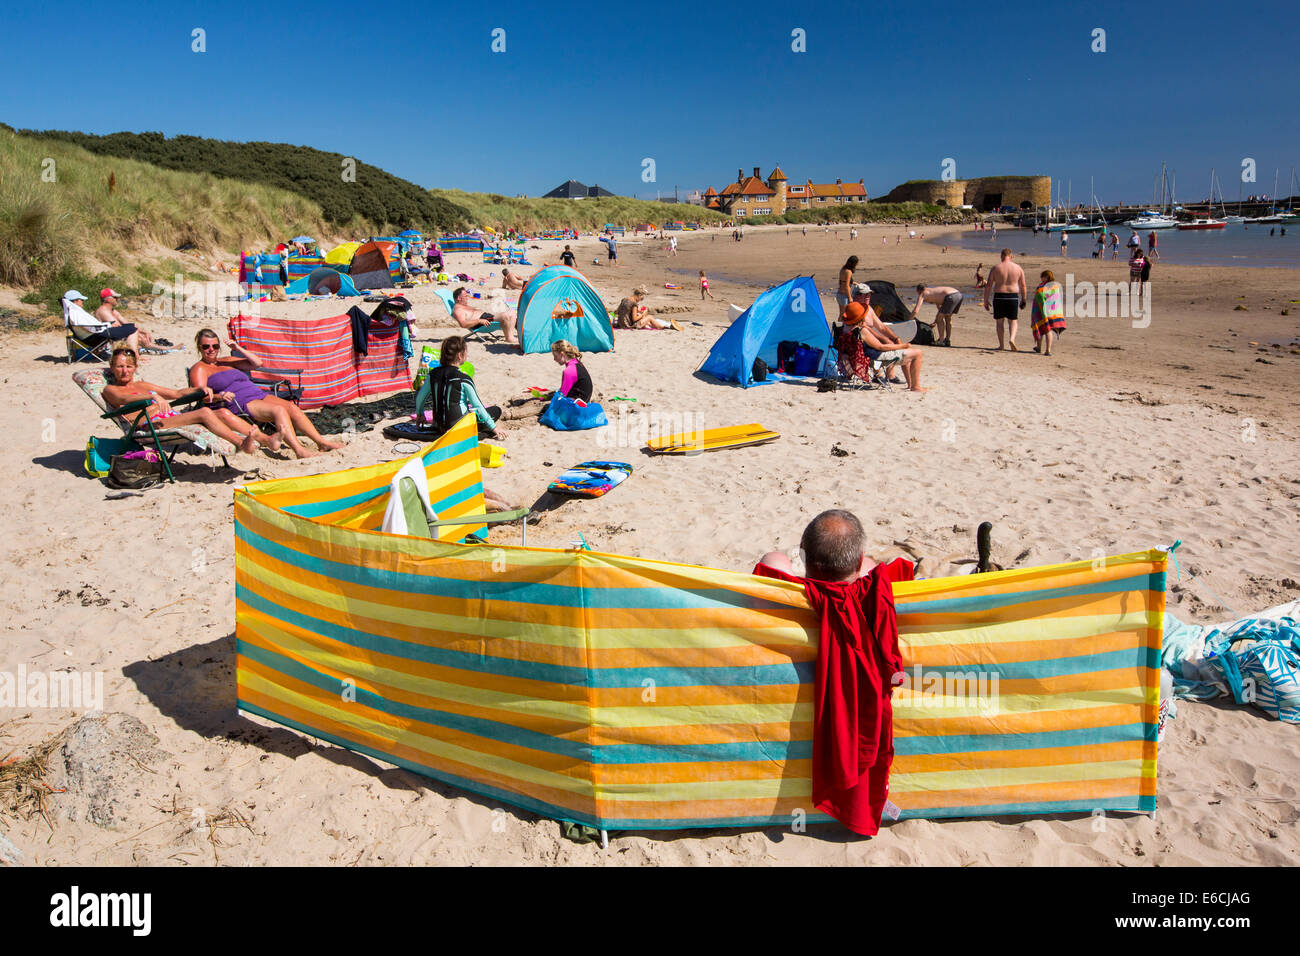 A busy summers day on Beadnell beach, Northumberland, UK. Stock Photo